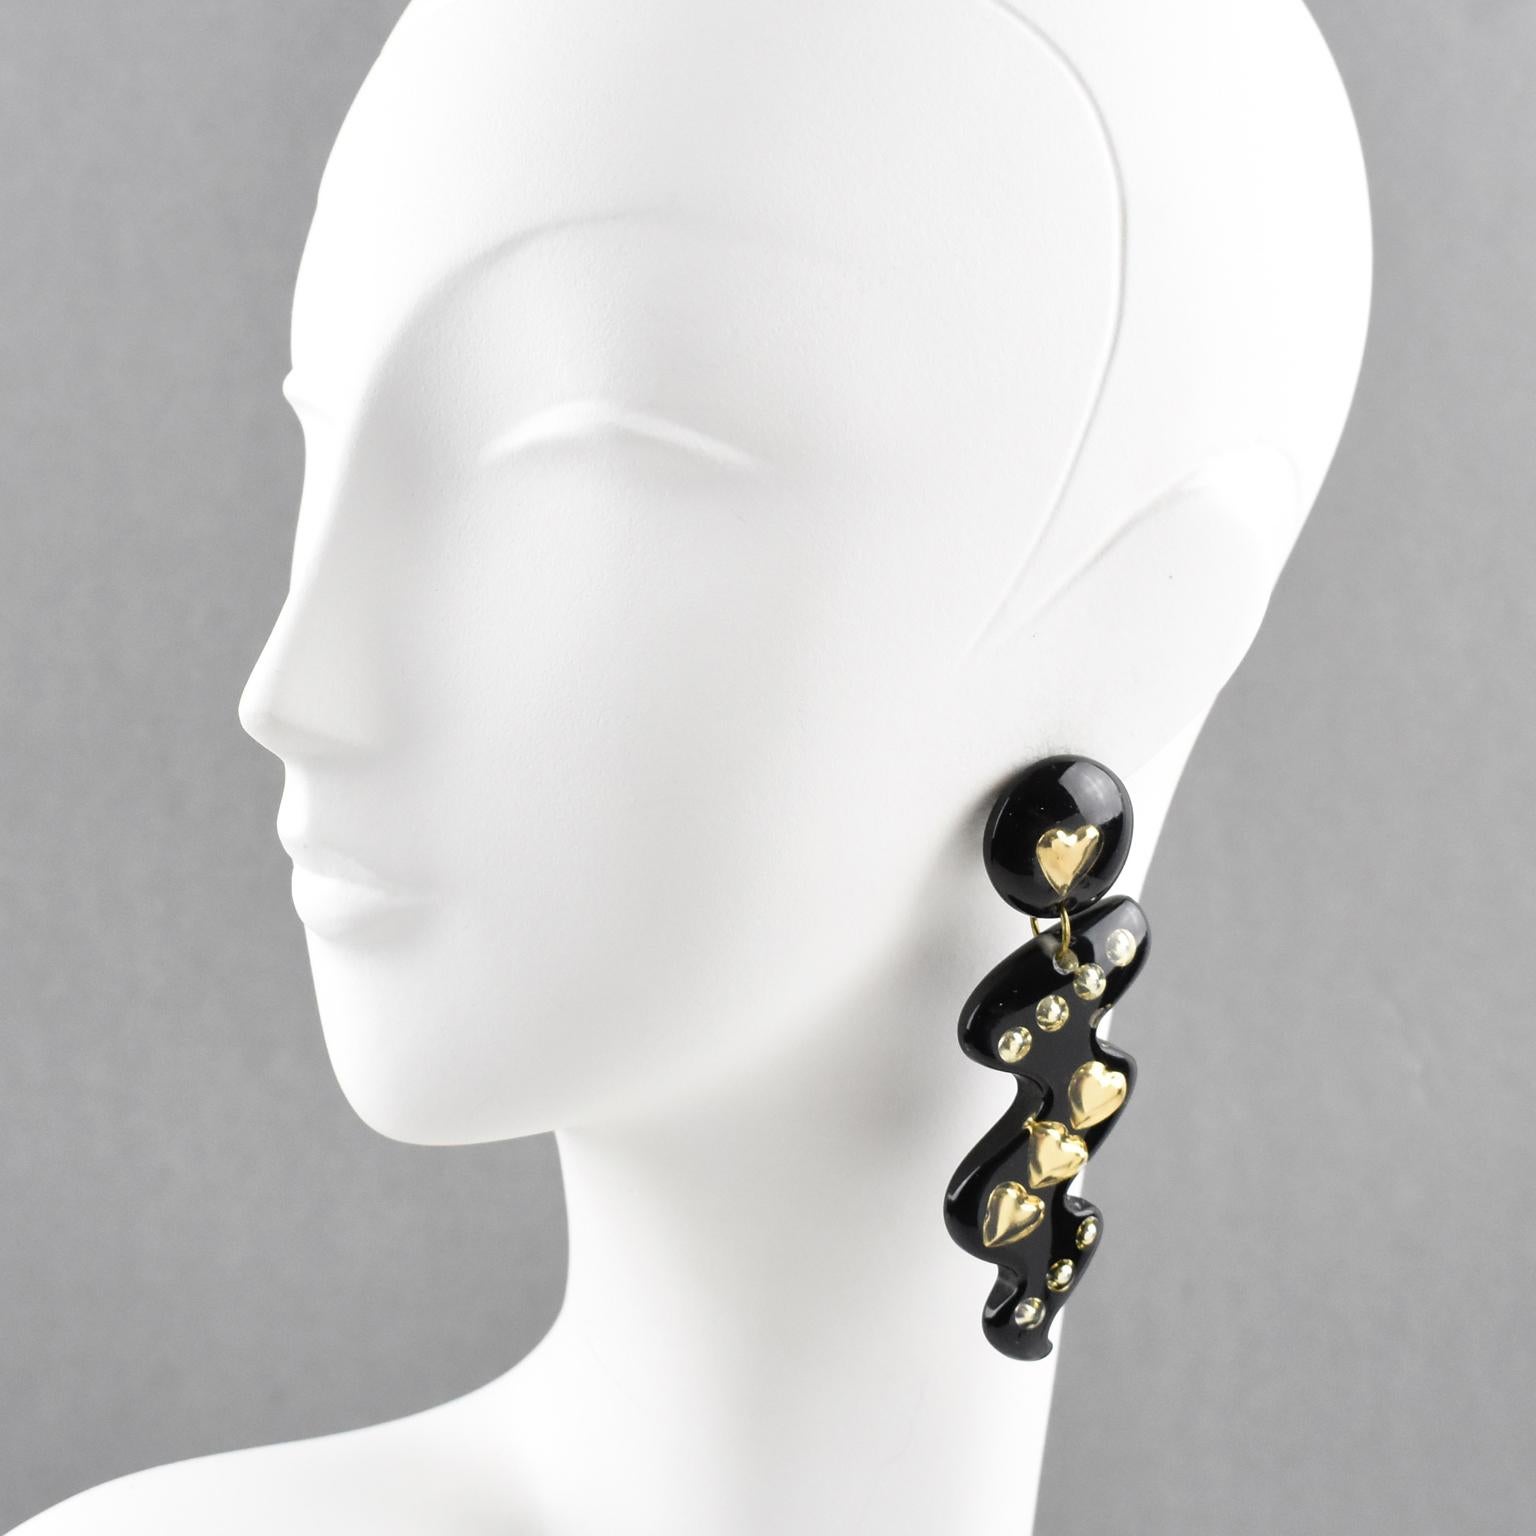 Impressive Italian Lucite dangling clip-on earrings. Oversized zig-zag shape in true licorice black color with gilded heart and bead inclusions. There is no visible maker's mark.
Measurements: 3.63 in. long (9.2 cm) x 1.19 in. wide (3 cm).